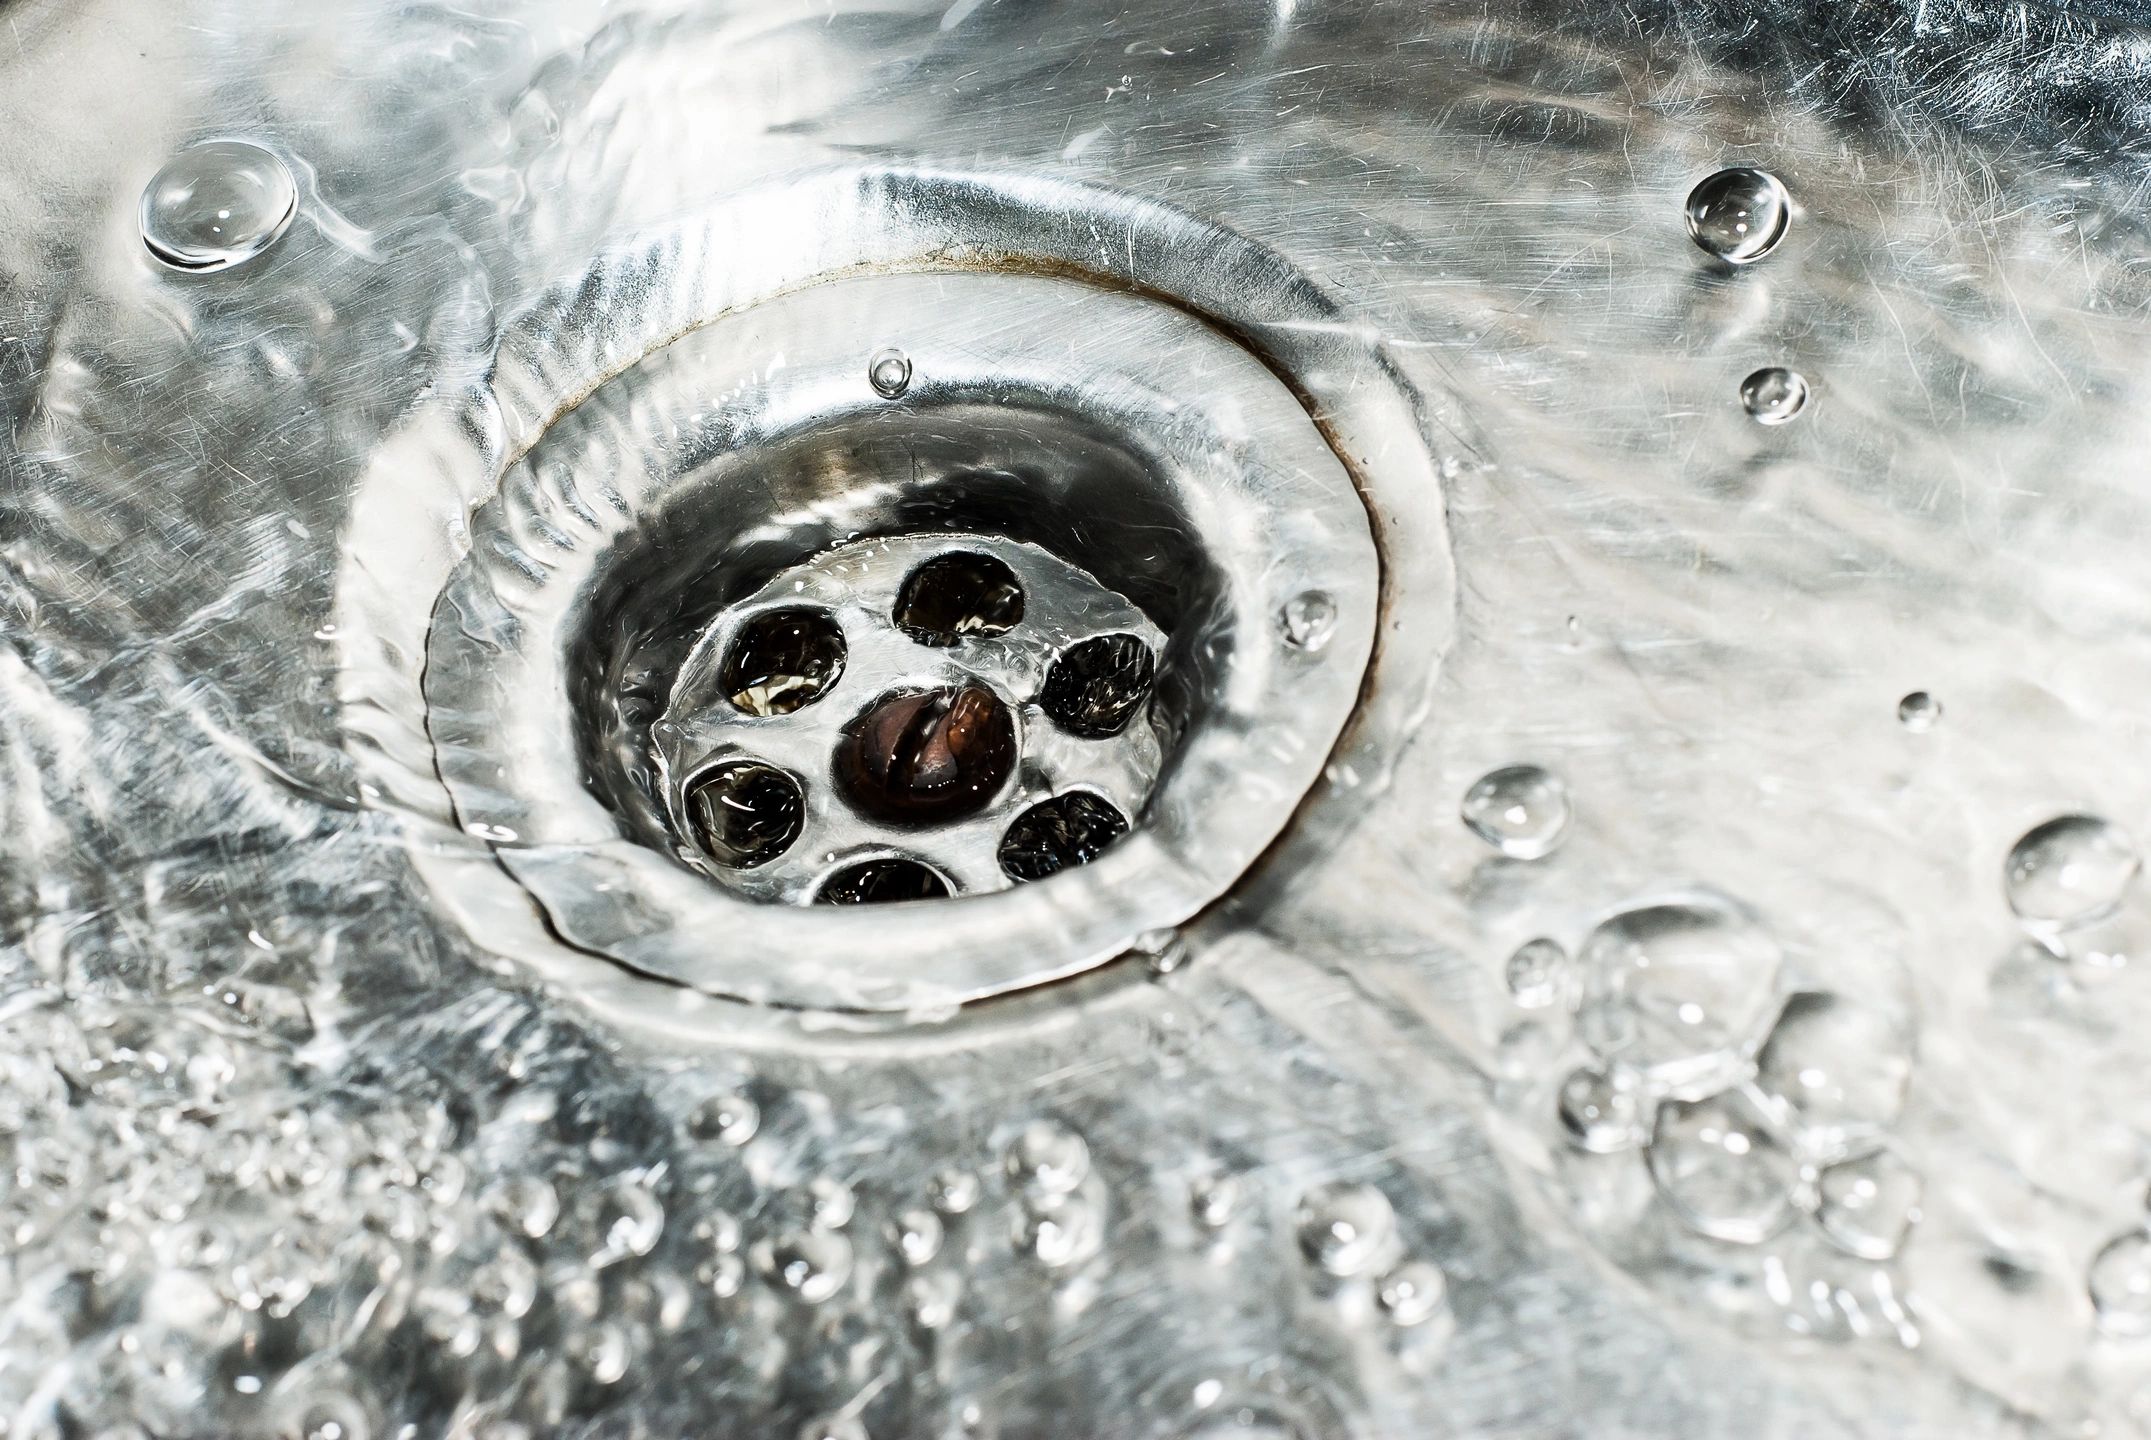 clean water draining into a stainless steel sink